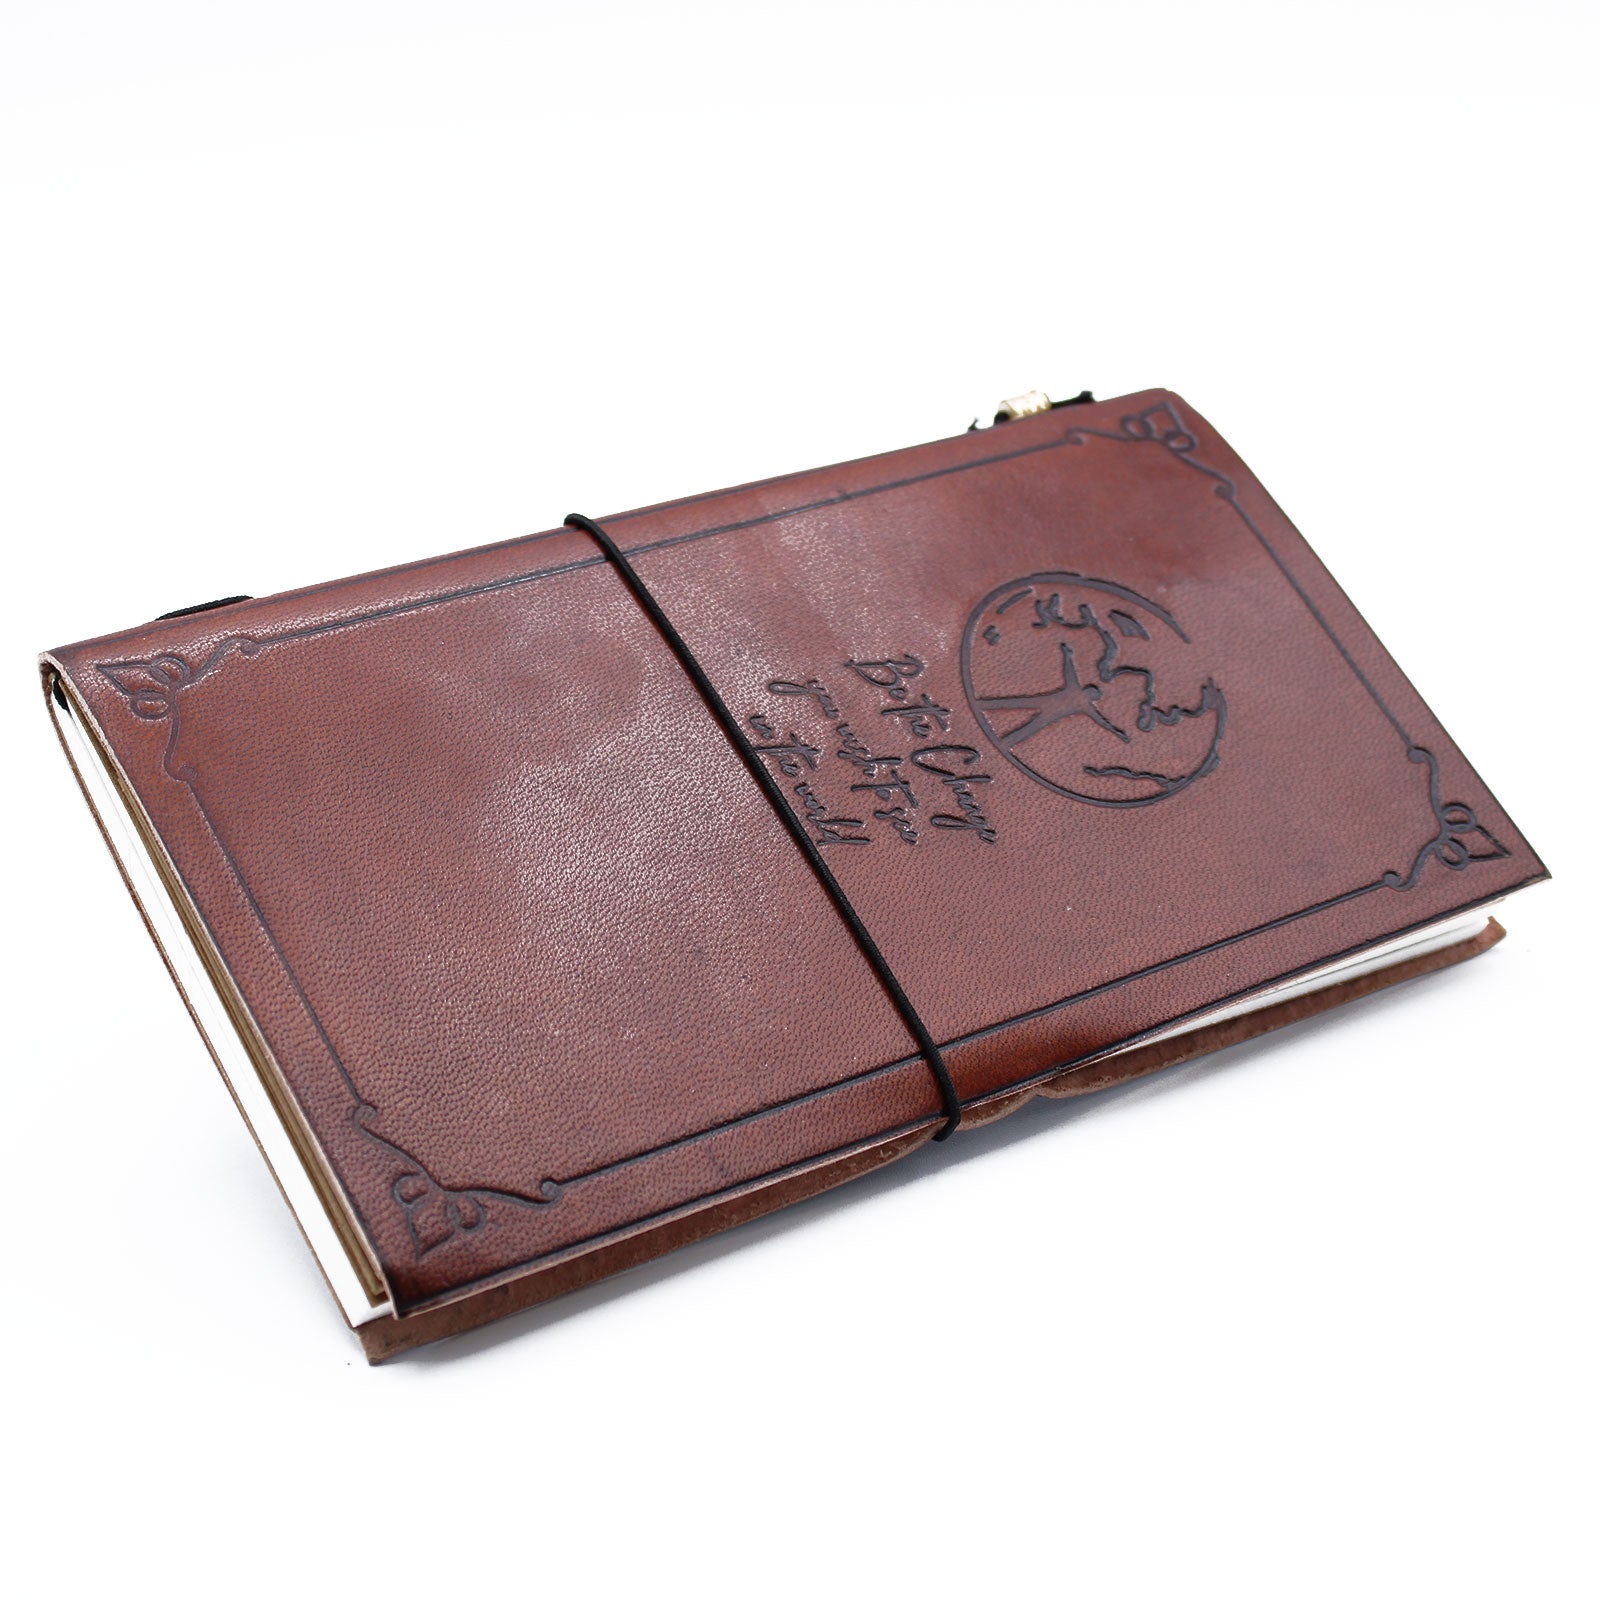 View Handmade Leather Journal Be the Change Brown 80 pages information